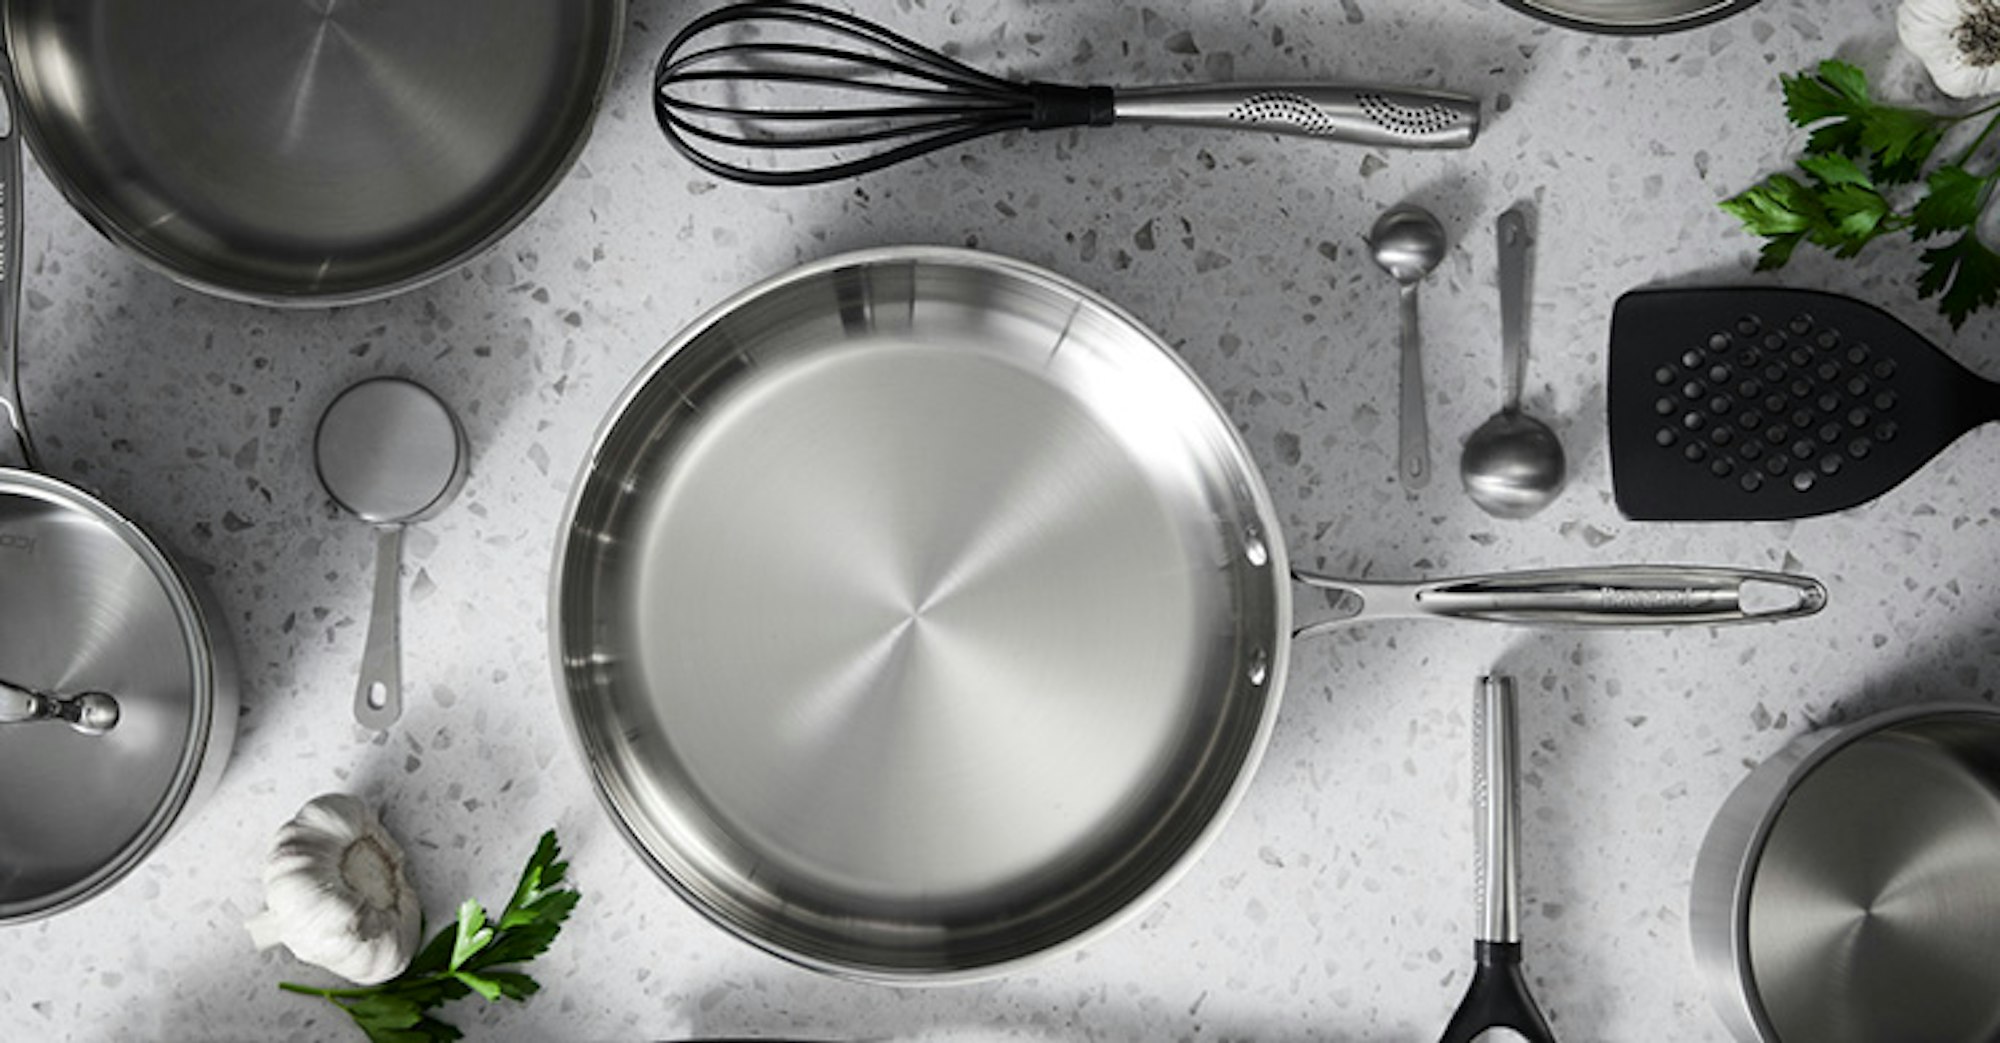  high-quality kitchenware, including knife sets and cookware.